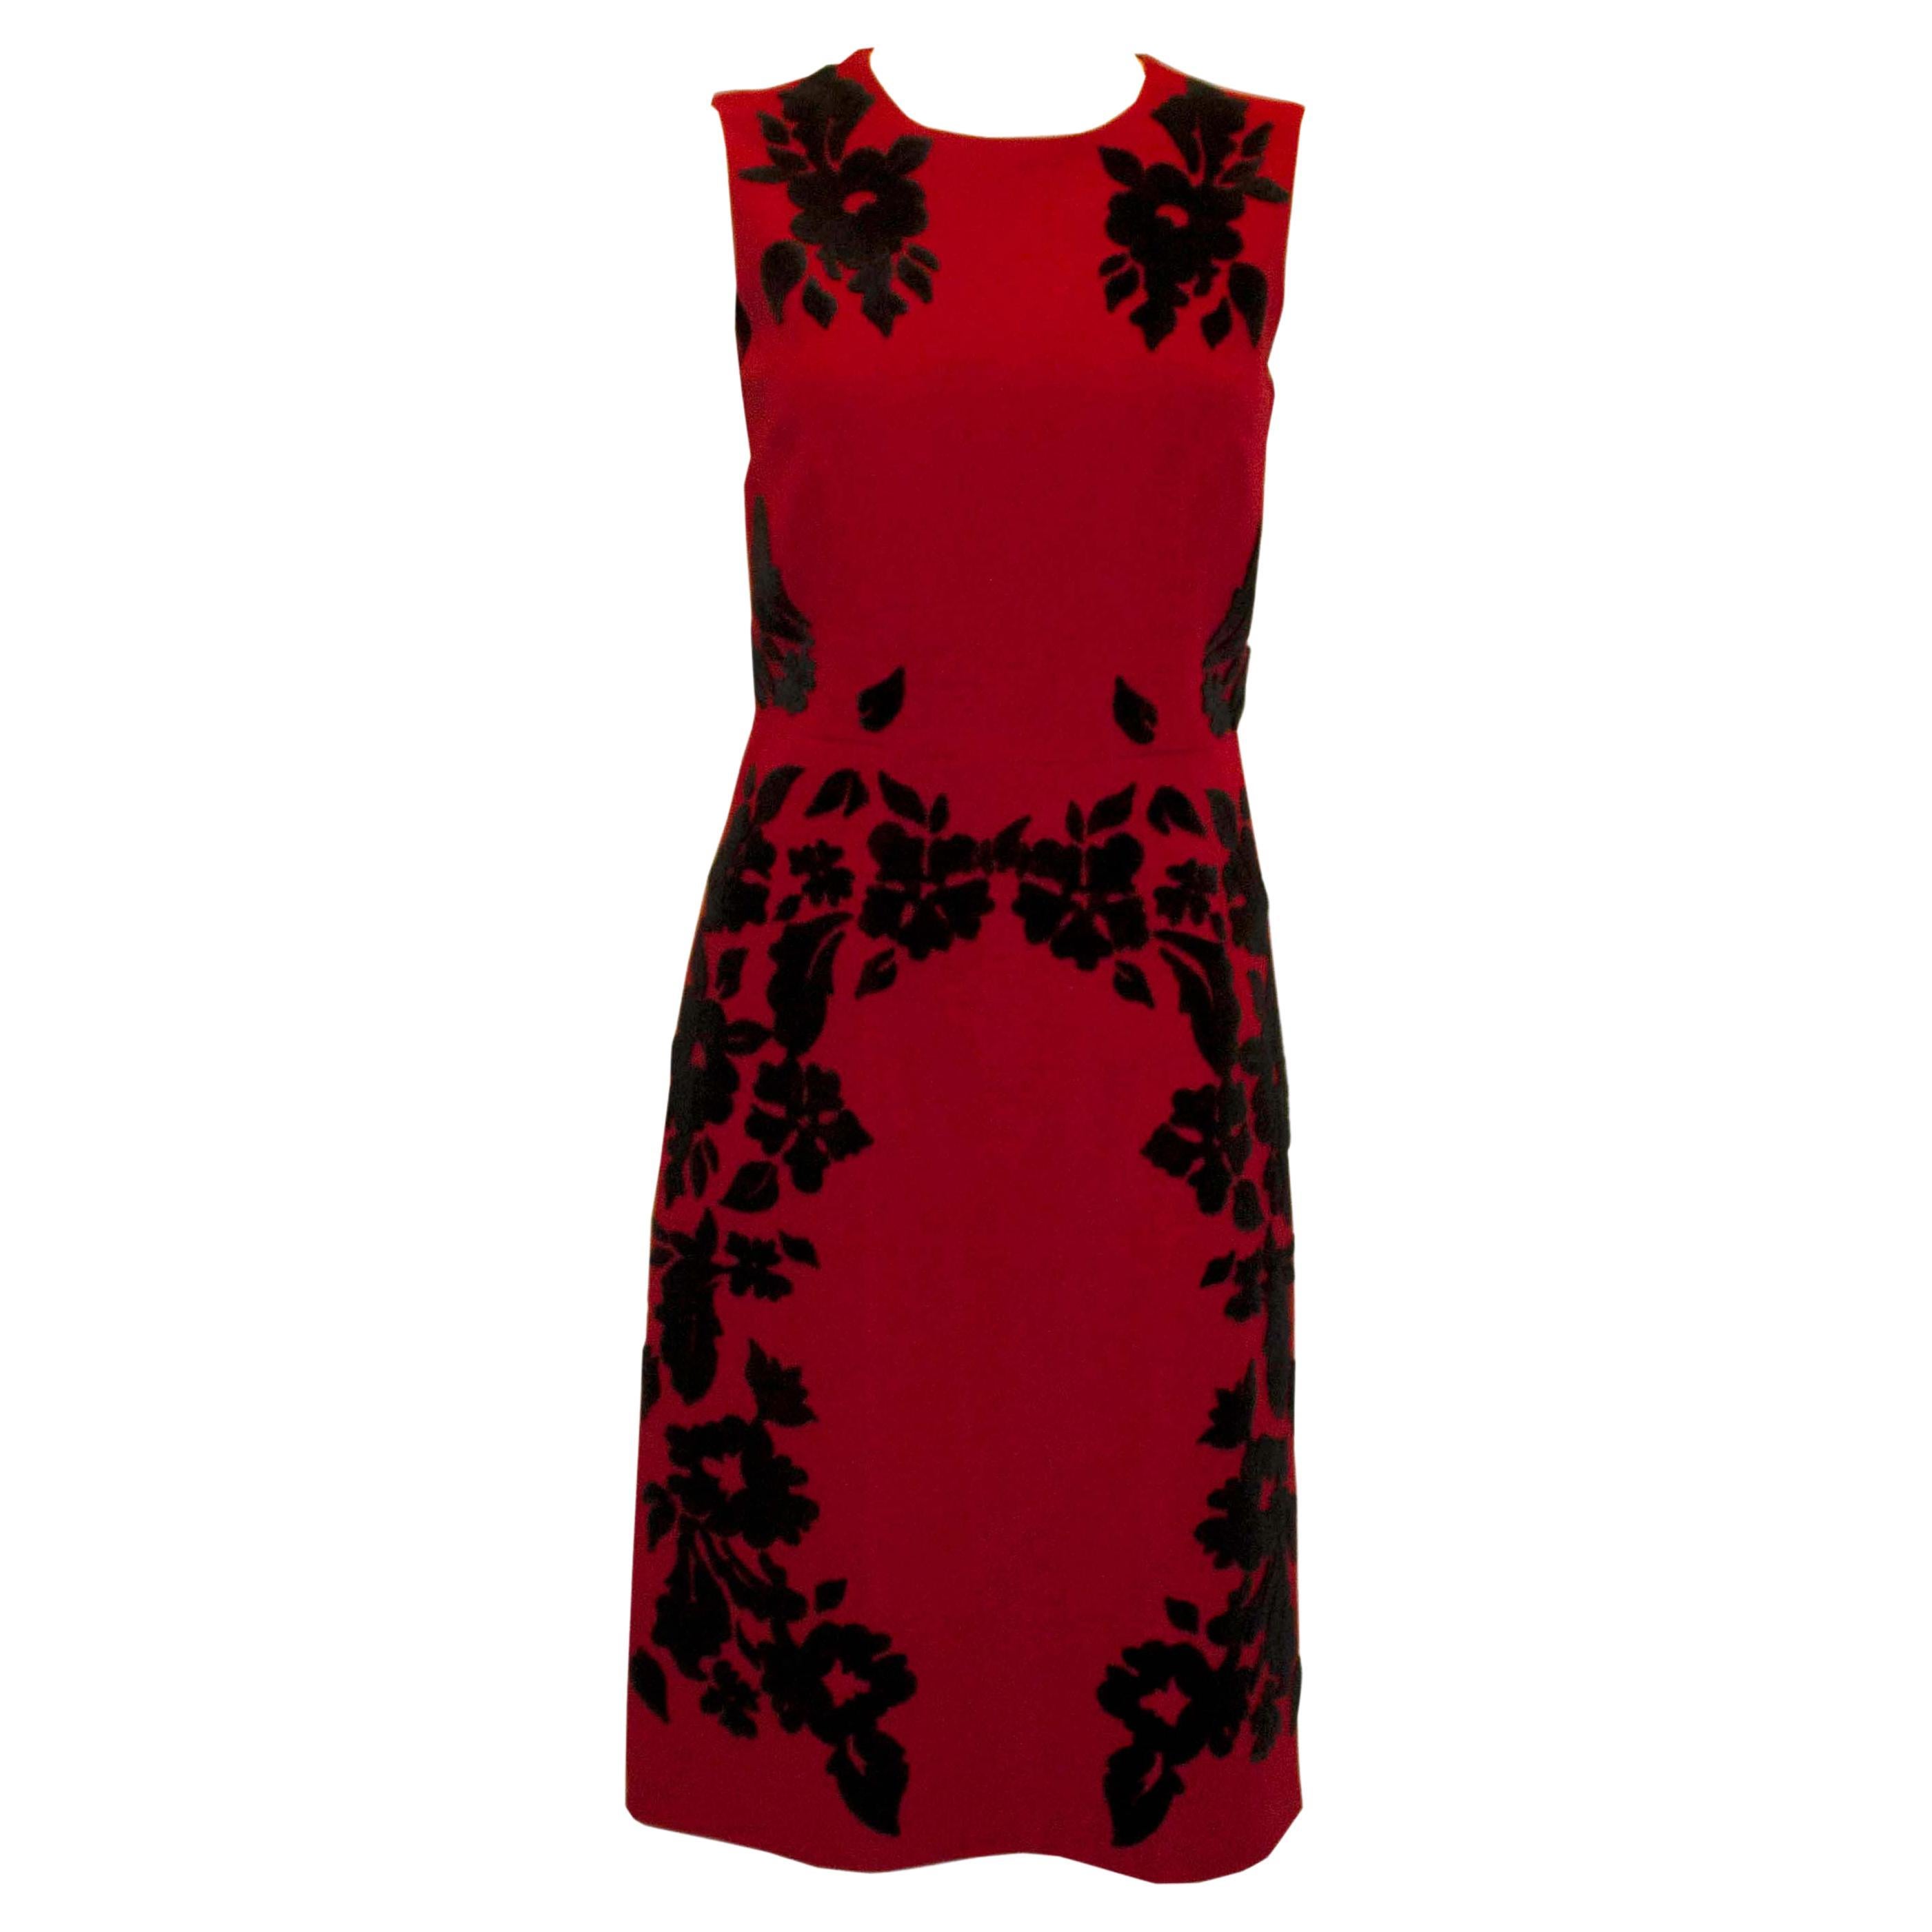 Dolce and Gabanna Black and Red Dress